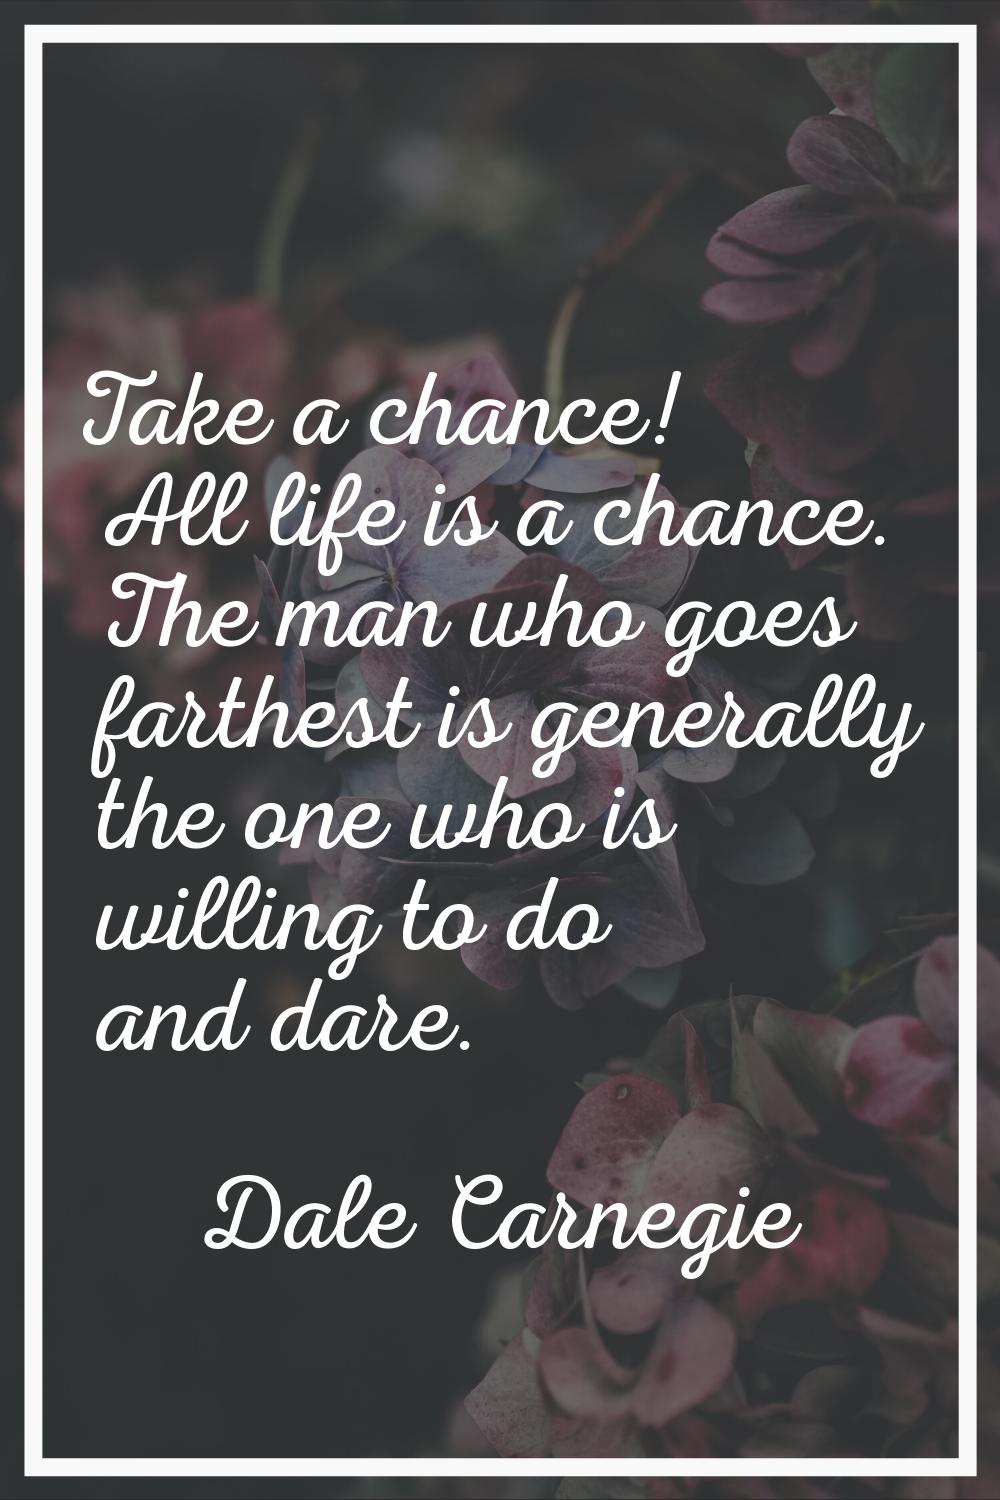 Take a chance! All life is a chance. The man who goes farthest is generally the one who is willing 